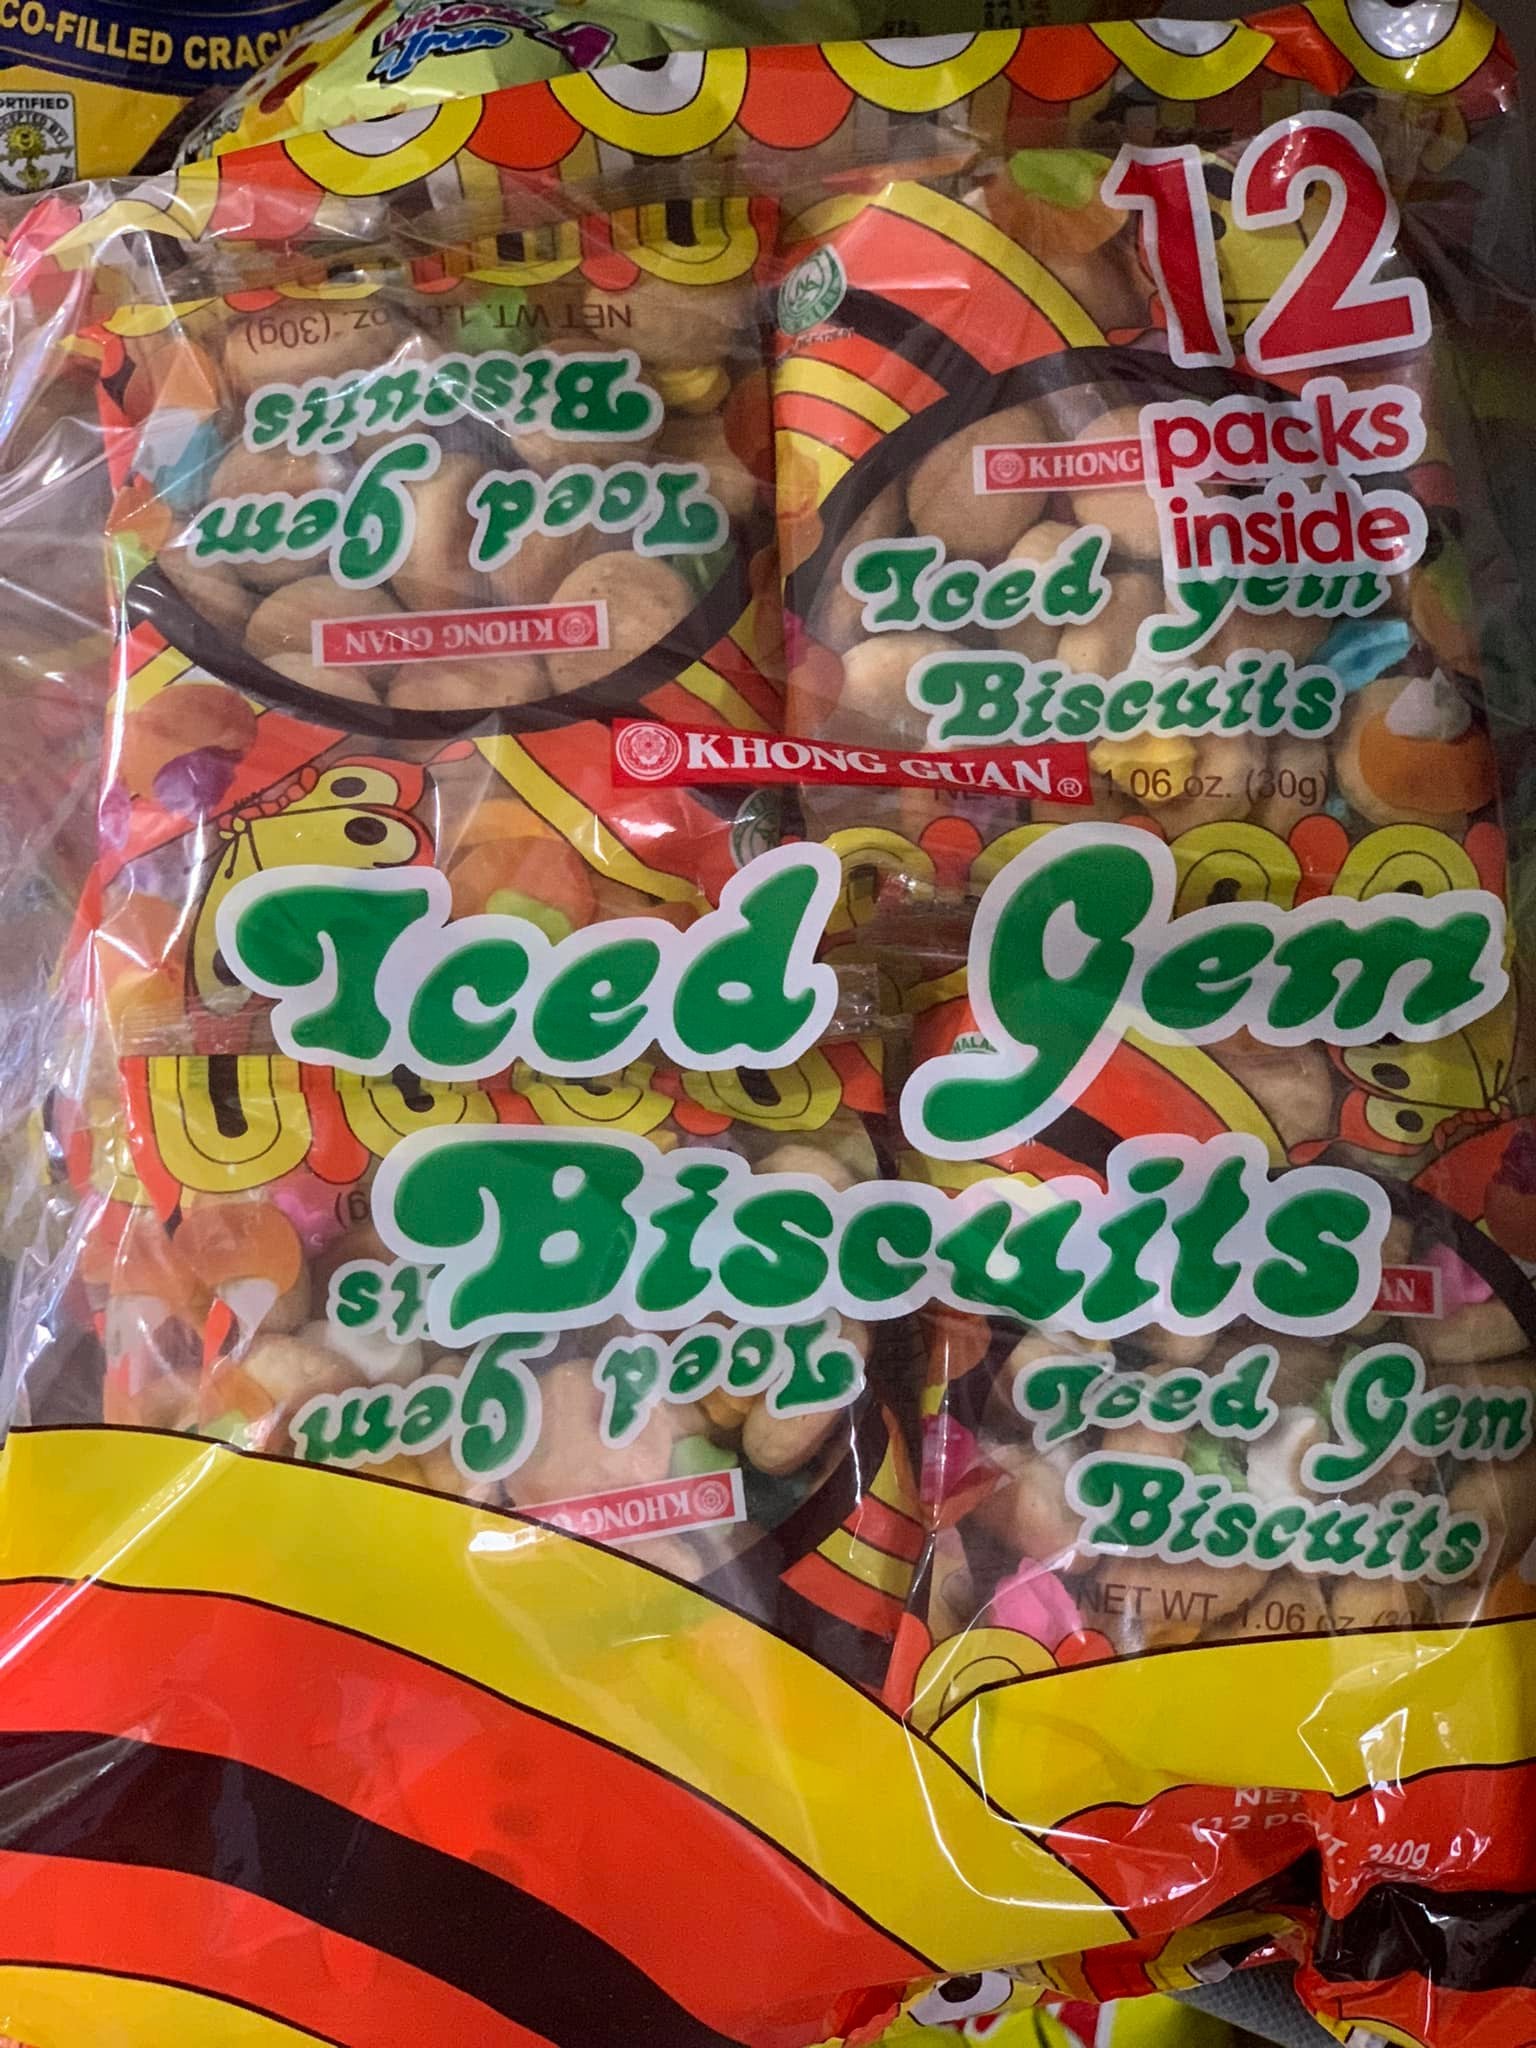 Iced Gem Biscuits